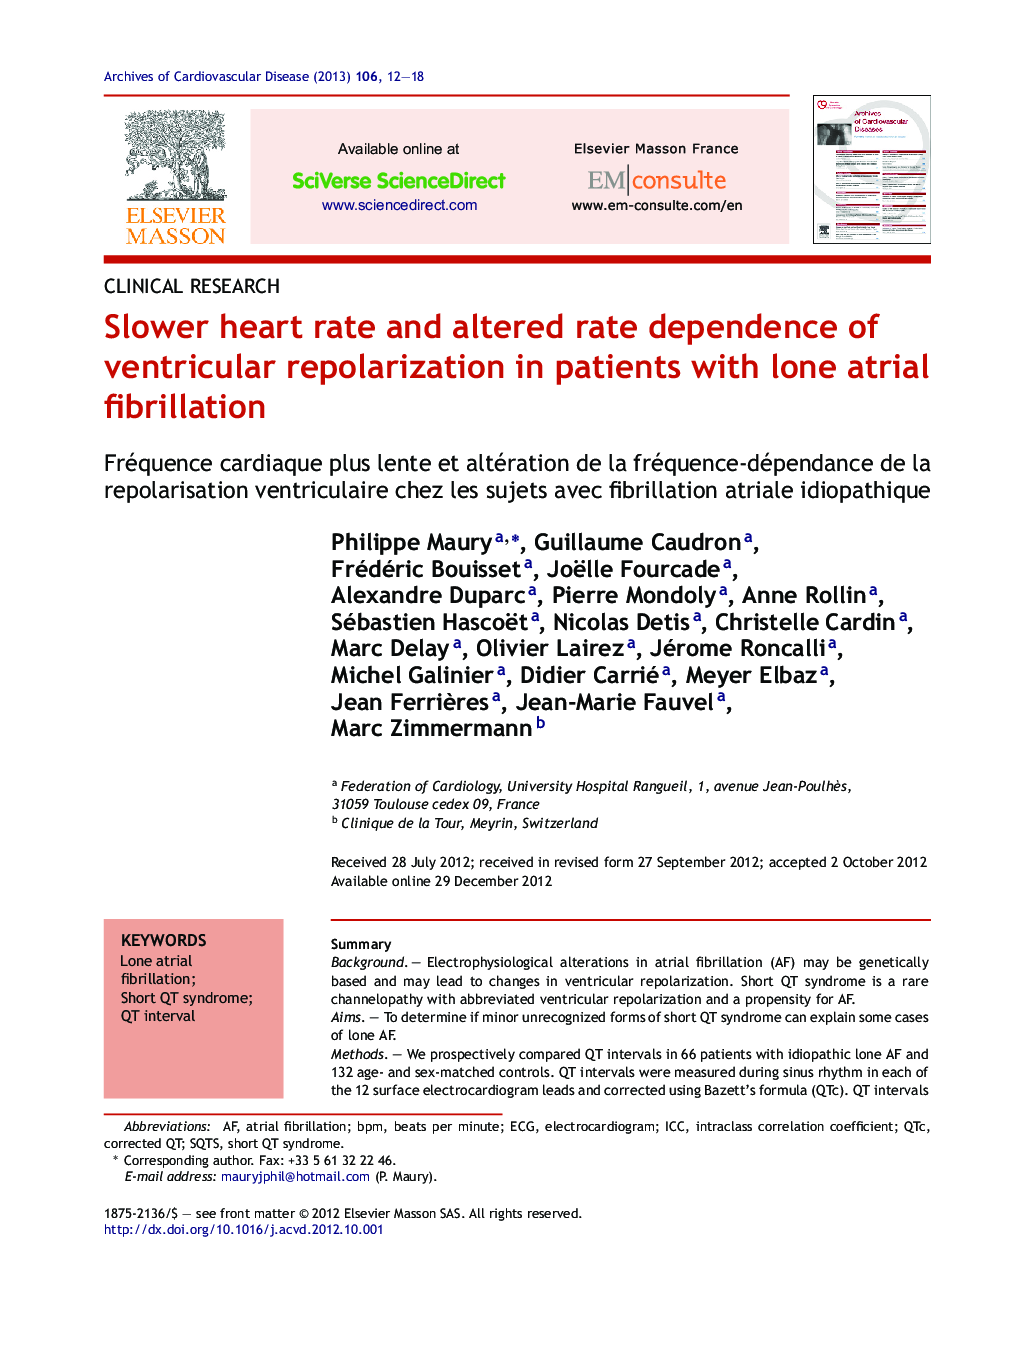 Slower heart rate and altered rate dependence of ventricular repolarization in patients with lone atrial fibrillation